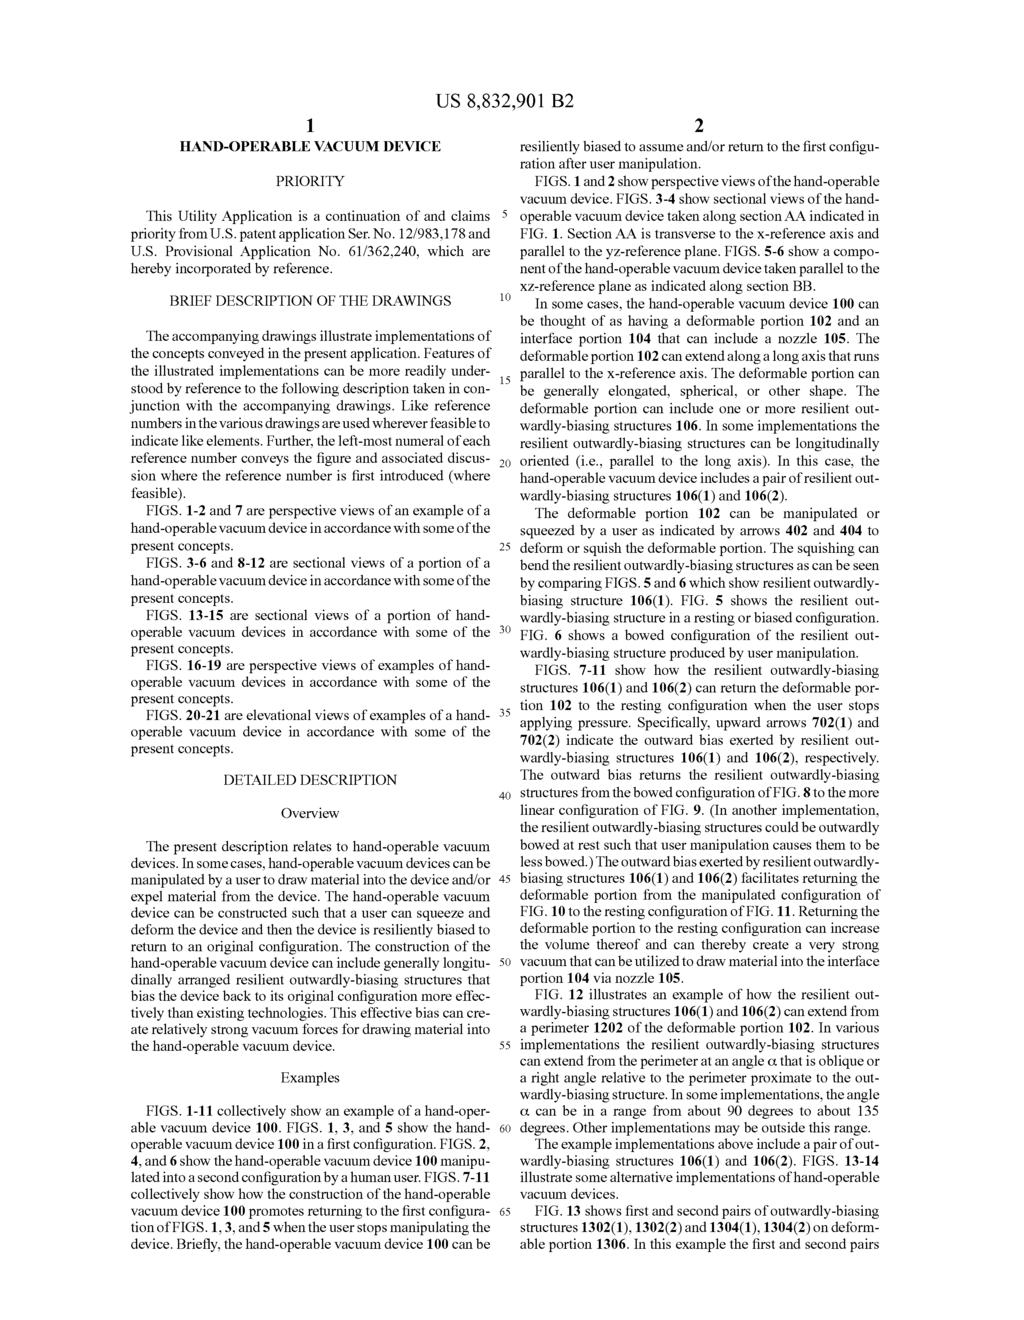 1. HAND-OPERABLEVACUUM DEVICE PRIORITY This Utility Application is a continuation of and claims priority from U.S. patent application Ser. No. 12/983,178 and U.S. Provisional Application No.